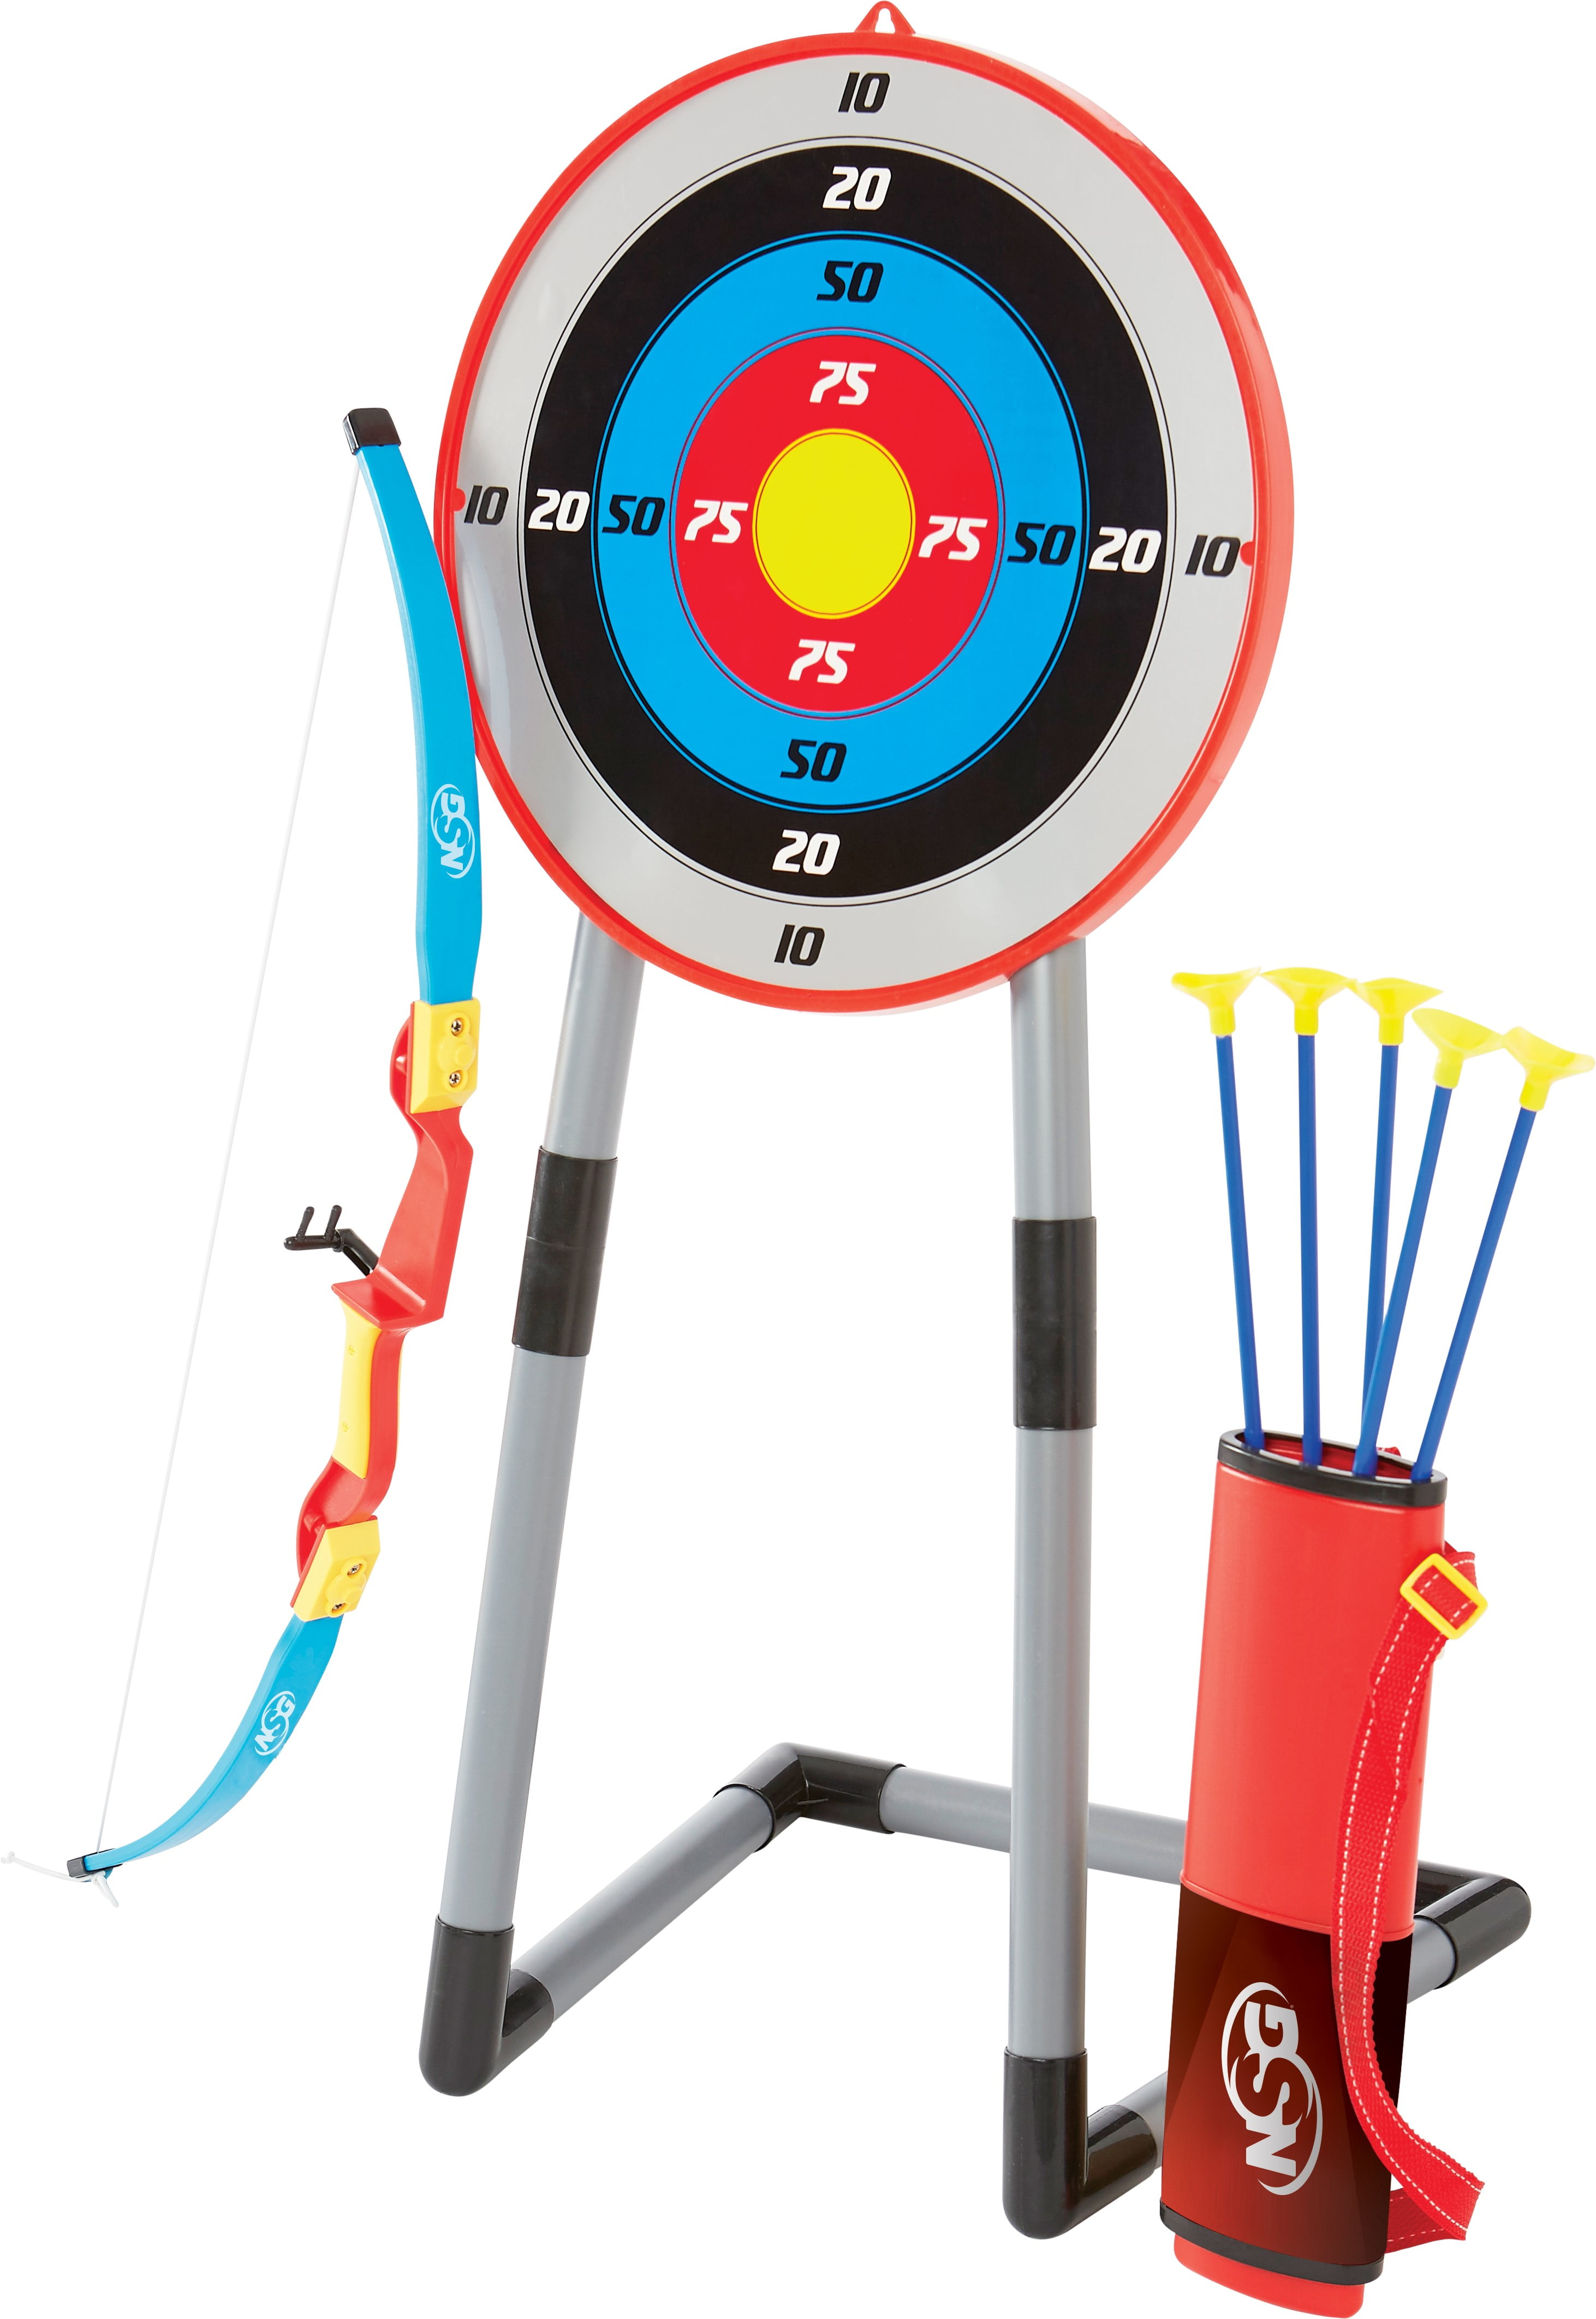 New Toy Archery Set Kids Children Archery Game Bow arrows Quiver Target stand 